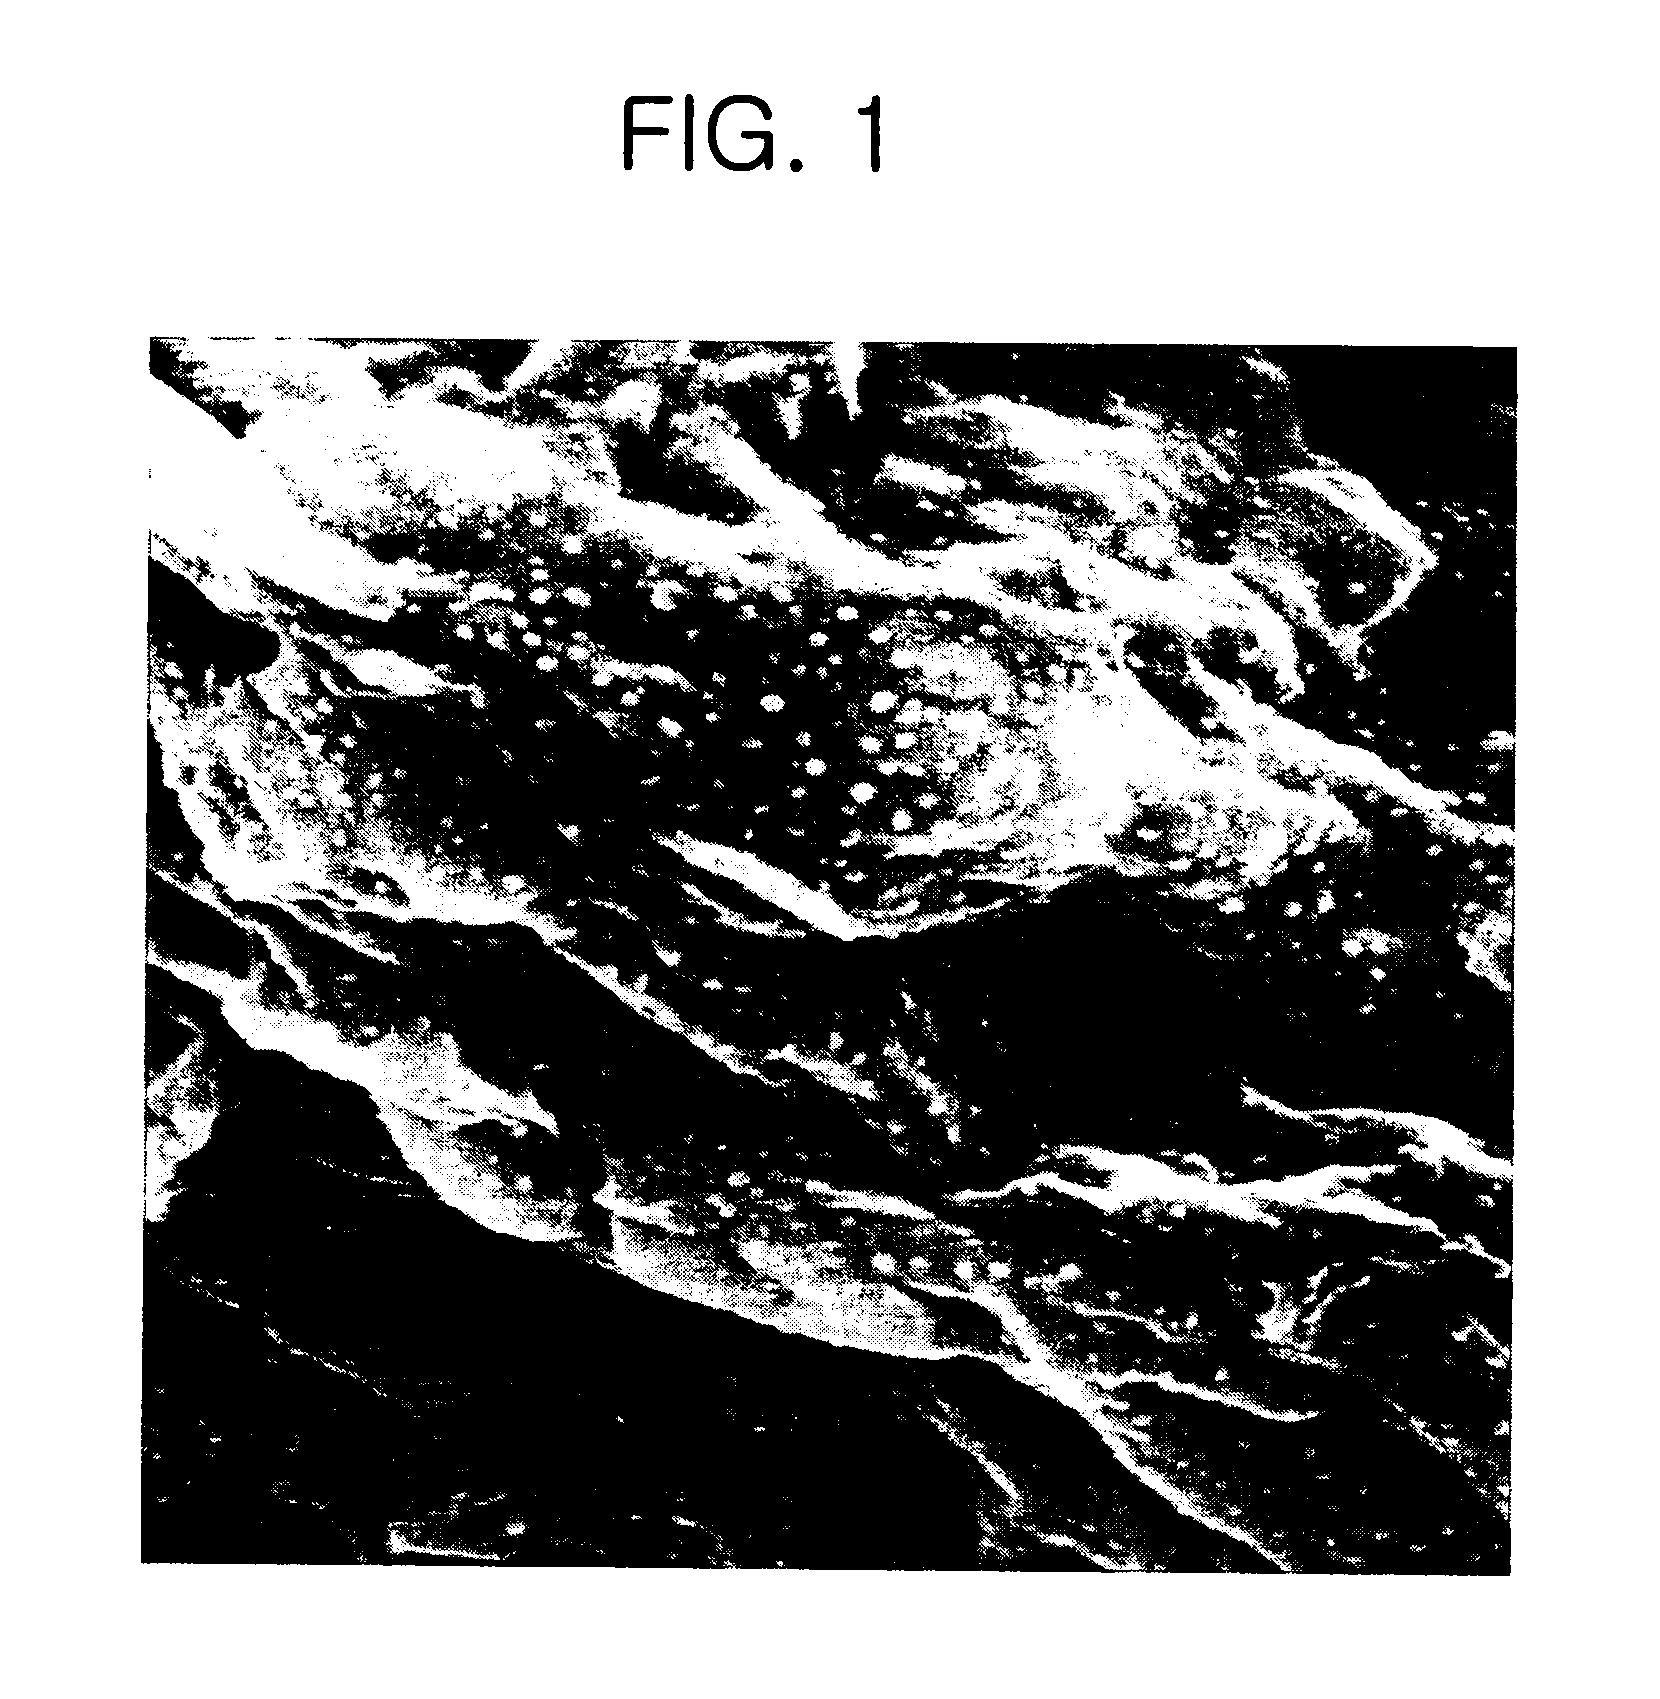 Composition for improving skin conditions comprising human growth hormone as an active ingredient